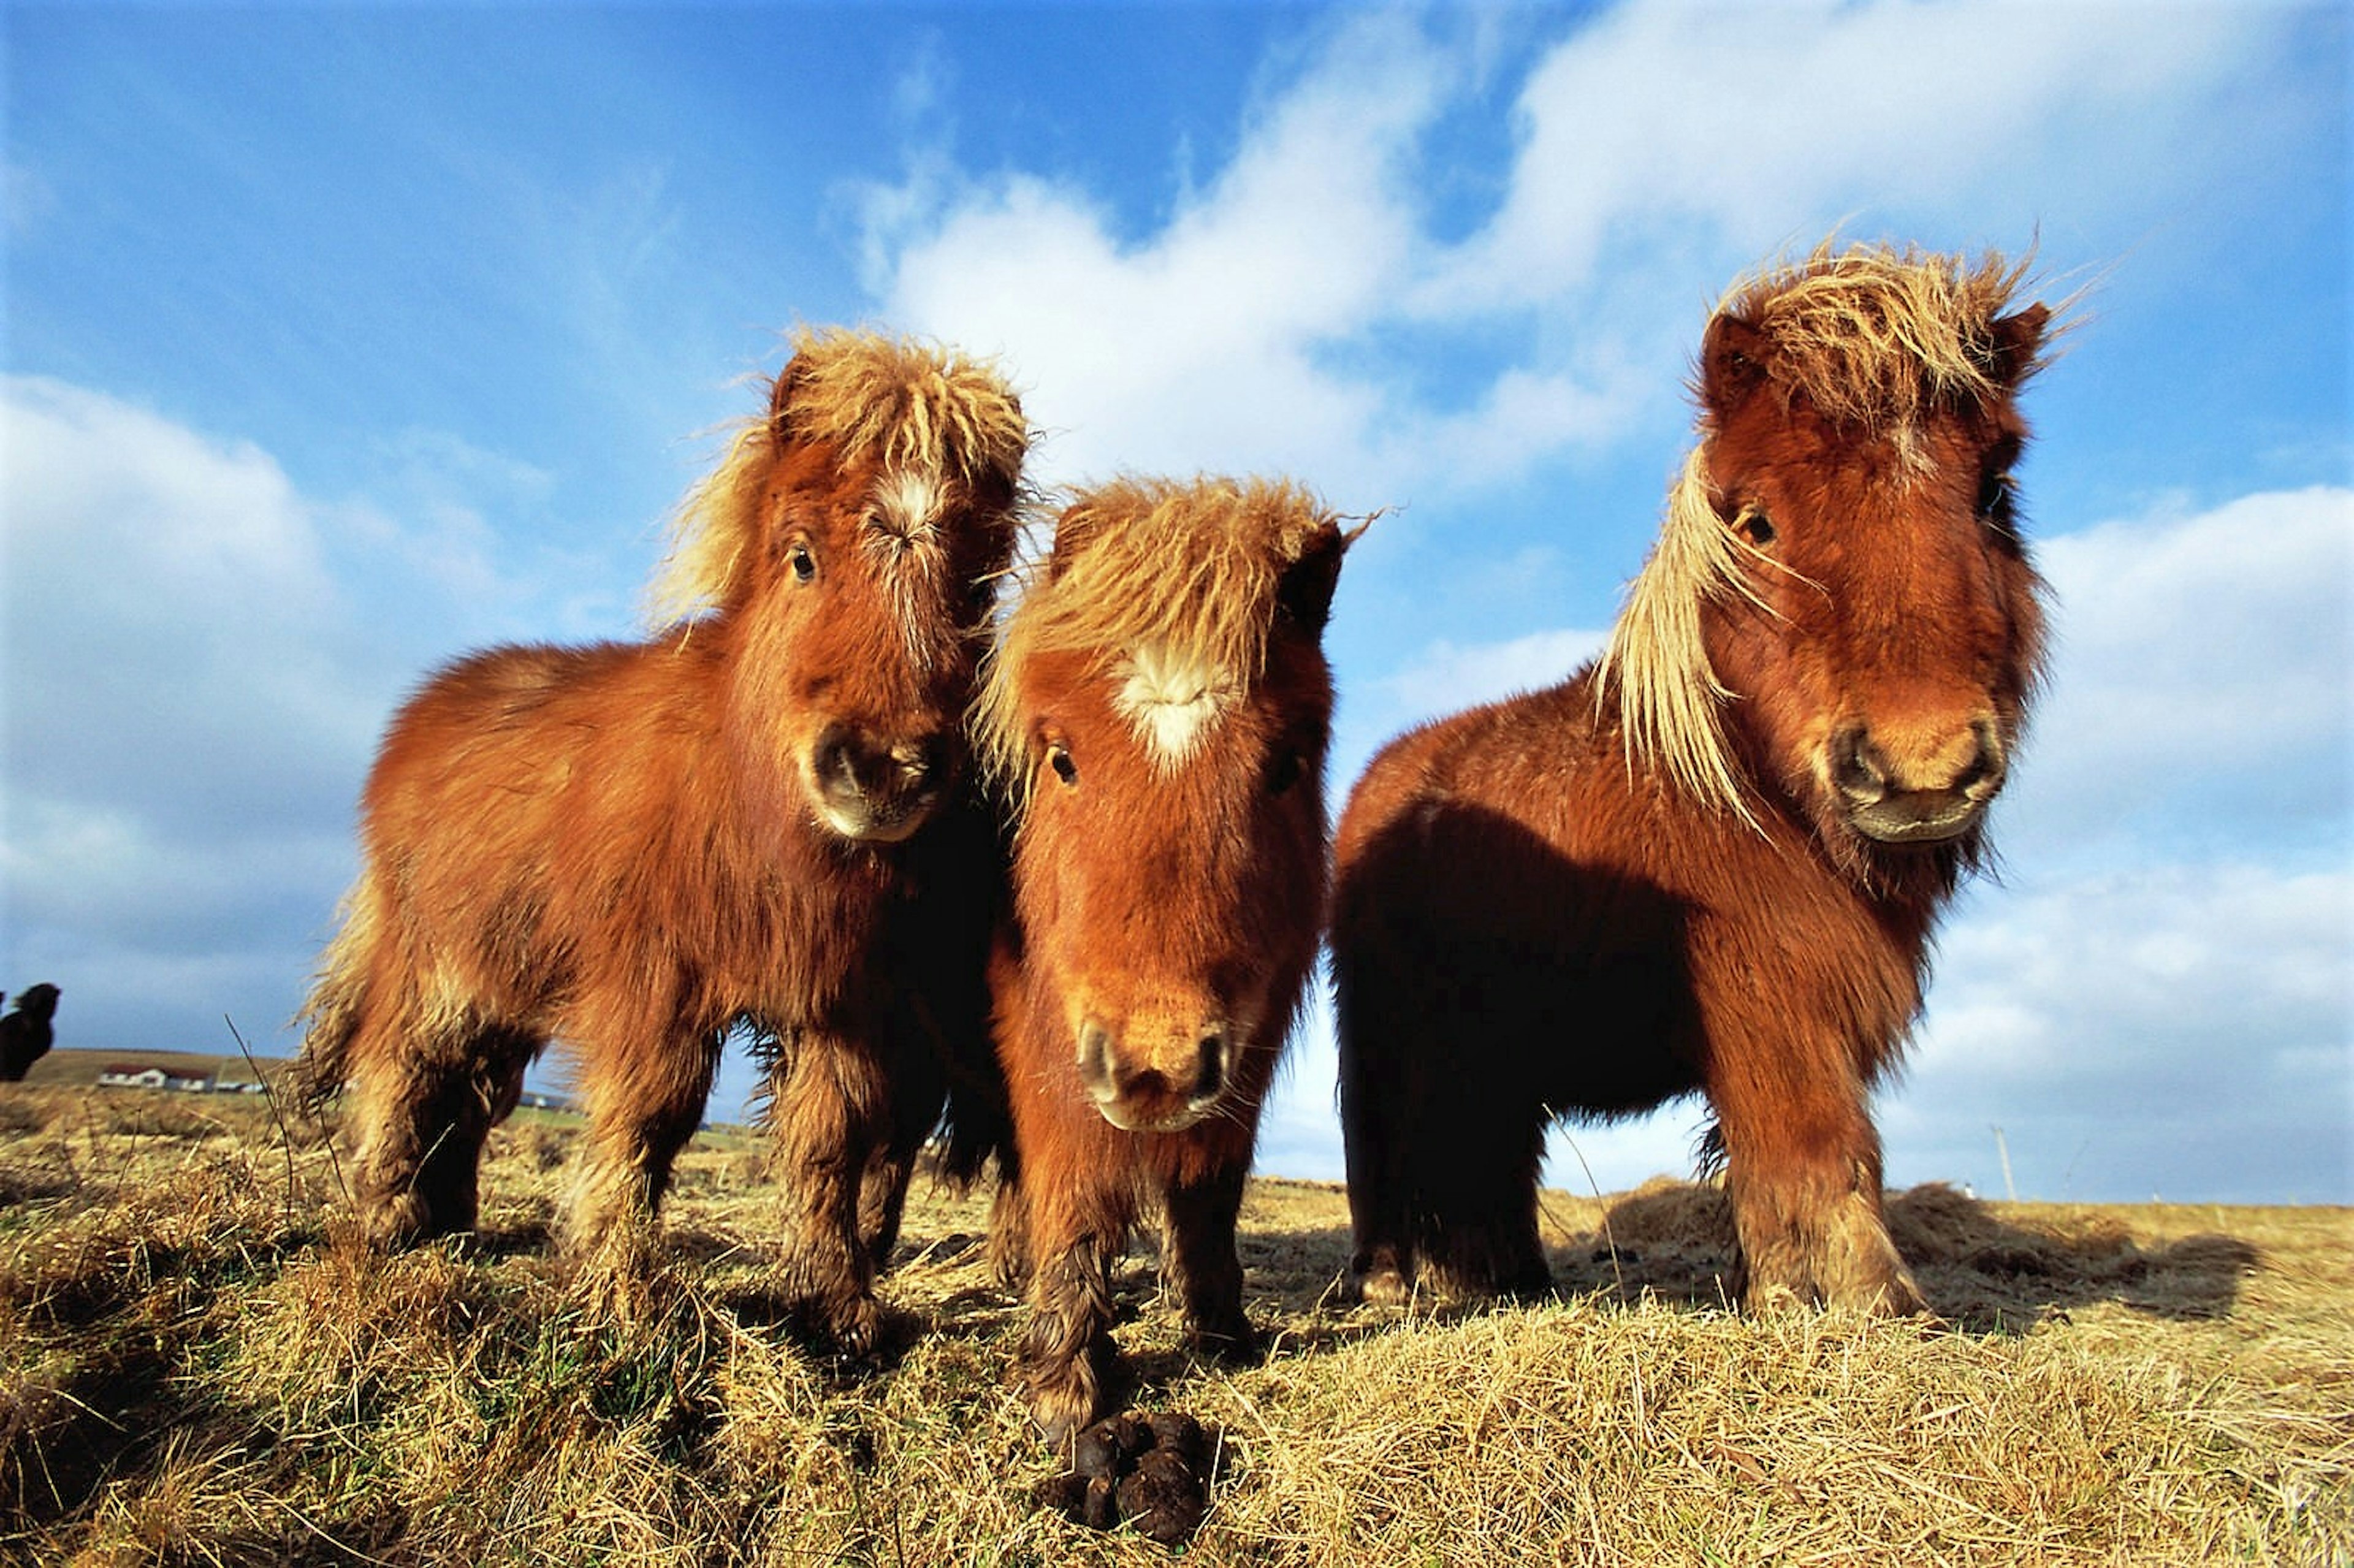 Three Shetland ponies look curiously at the viewer